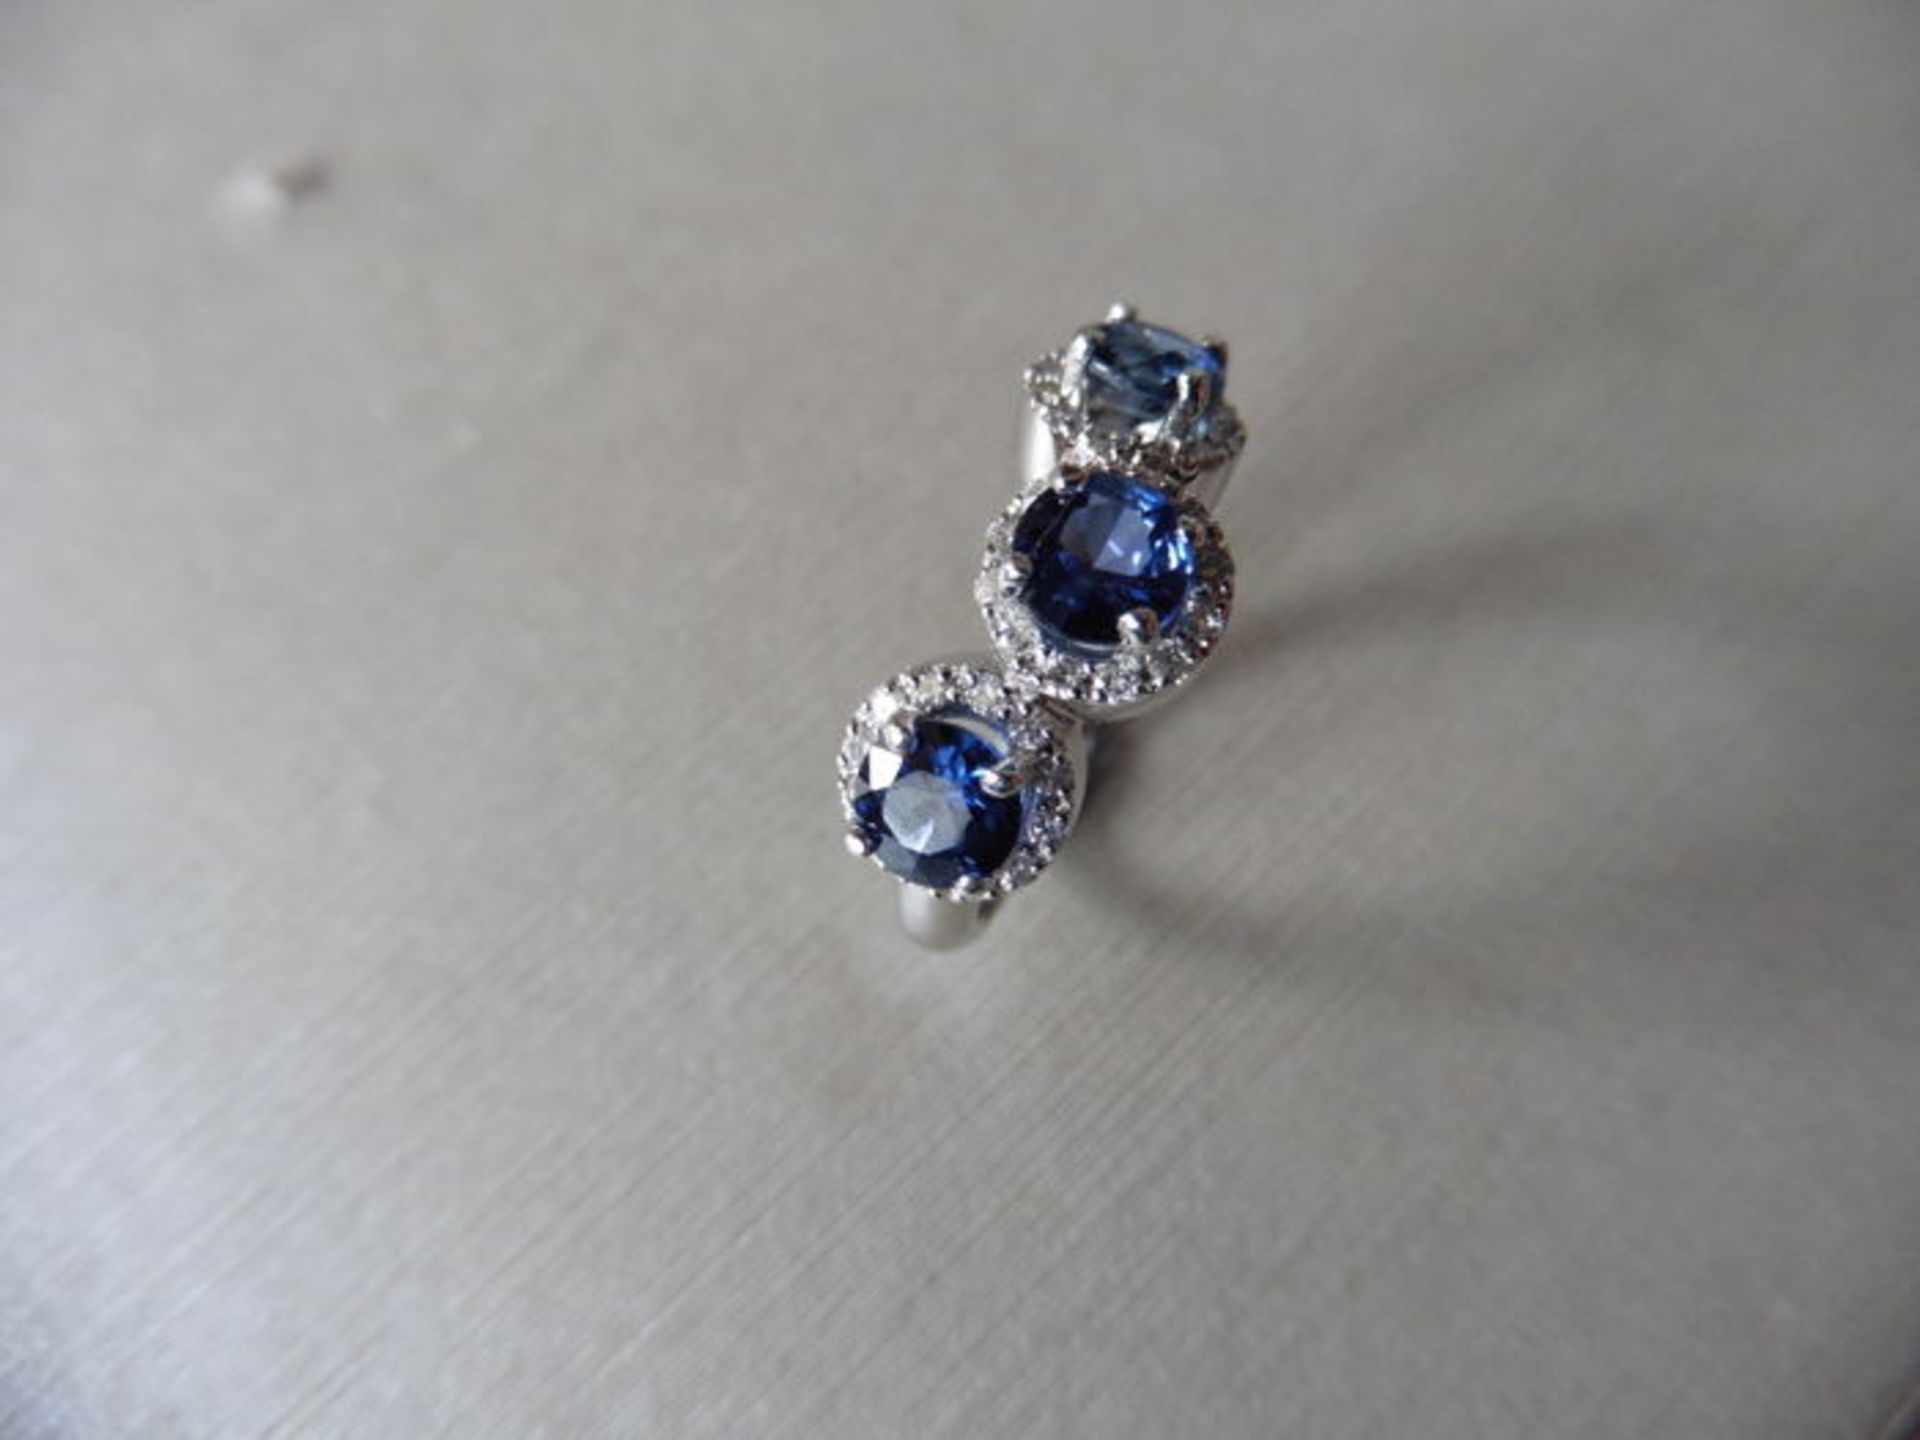 18ct white gold trilogy ring set with 3 round cut sapphires weighing 0.70ct. These are surrounded in - Image 3 of 3